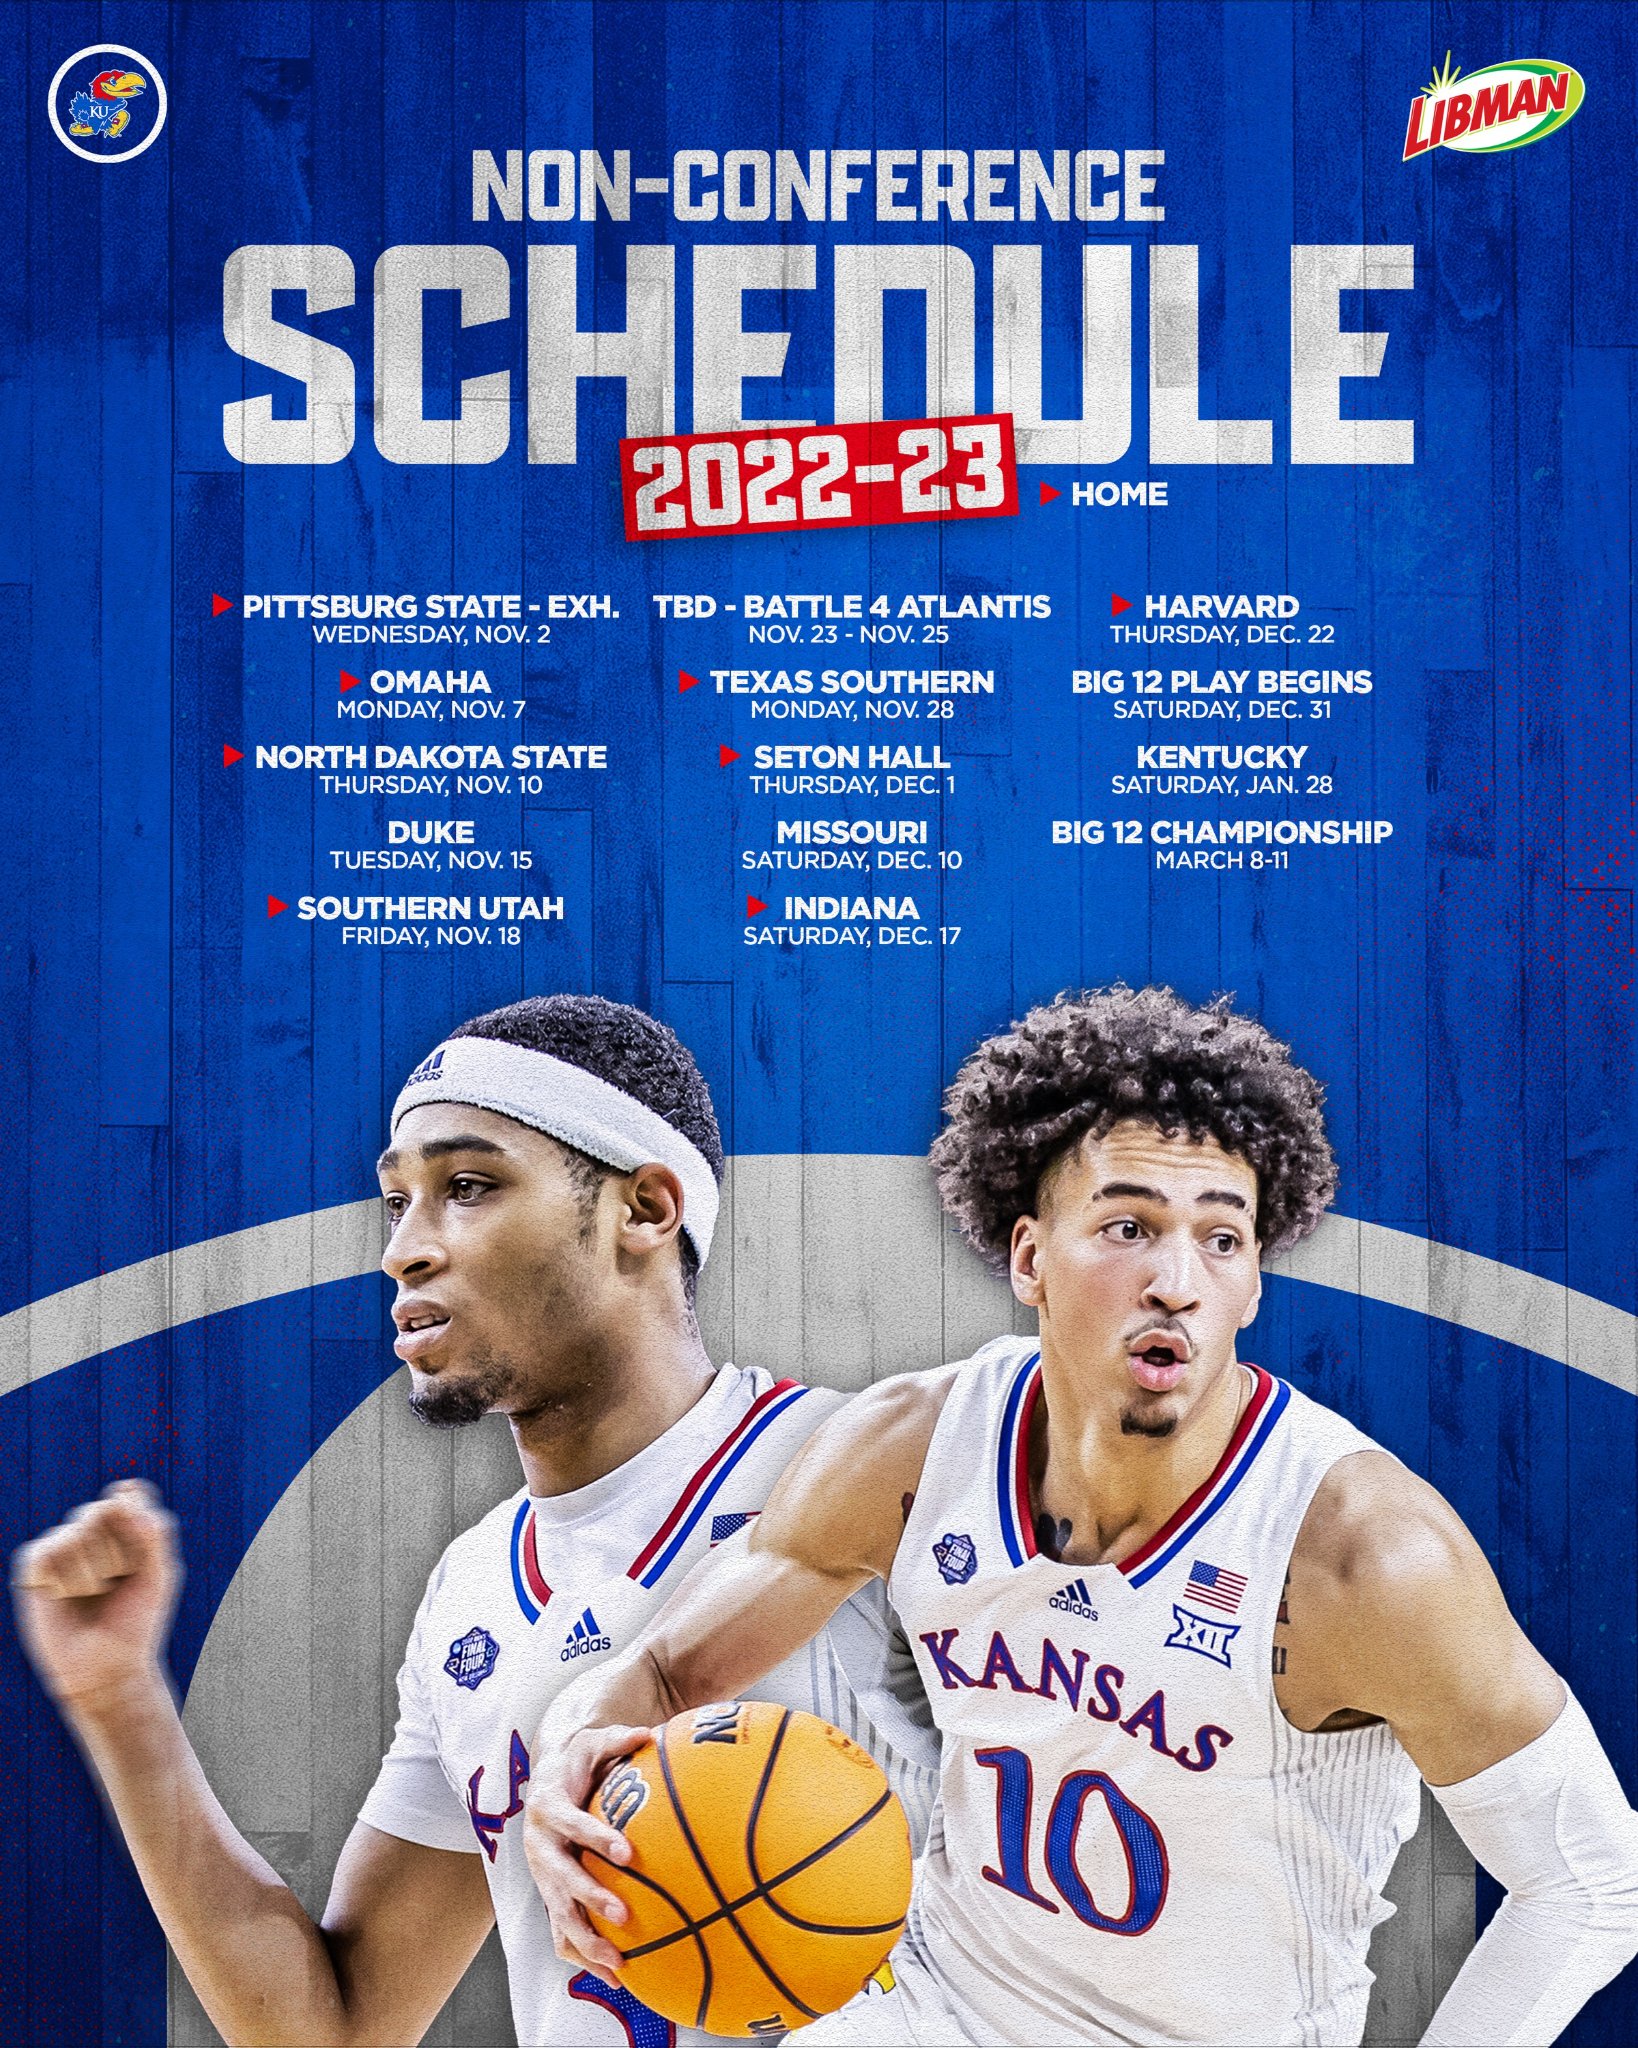 Kansas Announces The 2022 23 Men's Basketball Non Conference Schedule. Sunflower State Radio